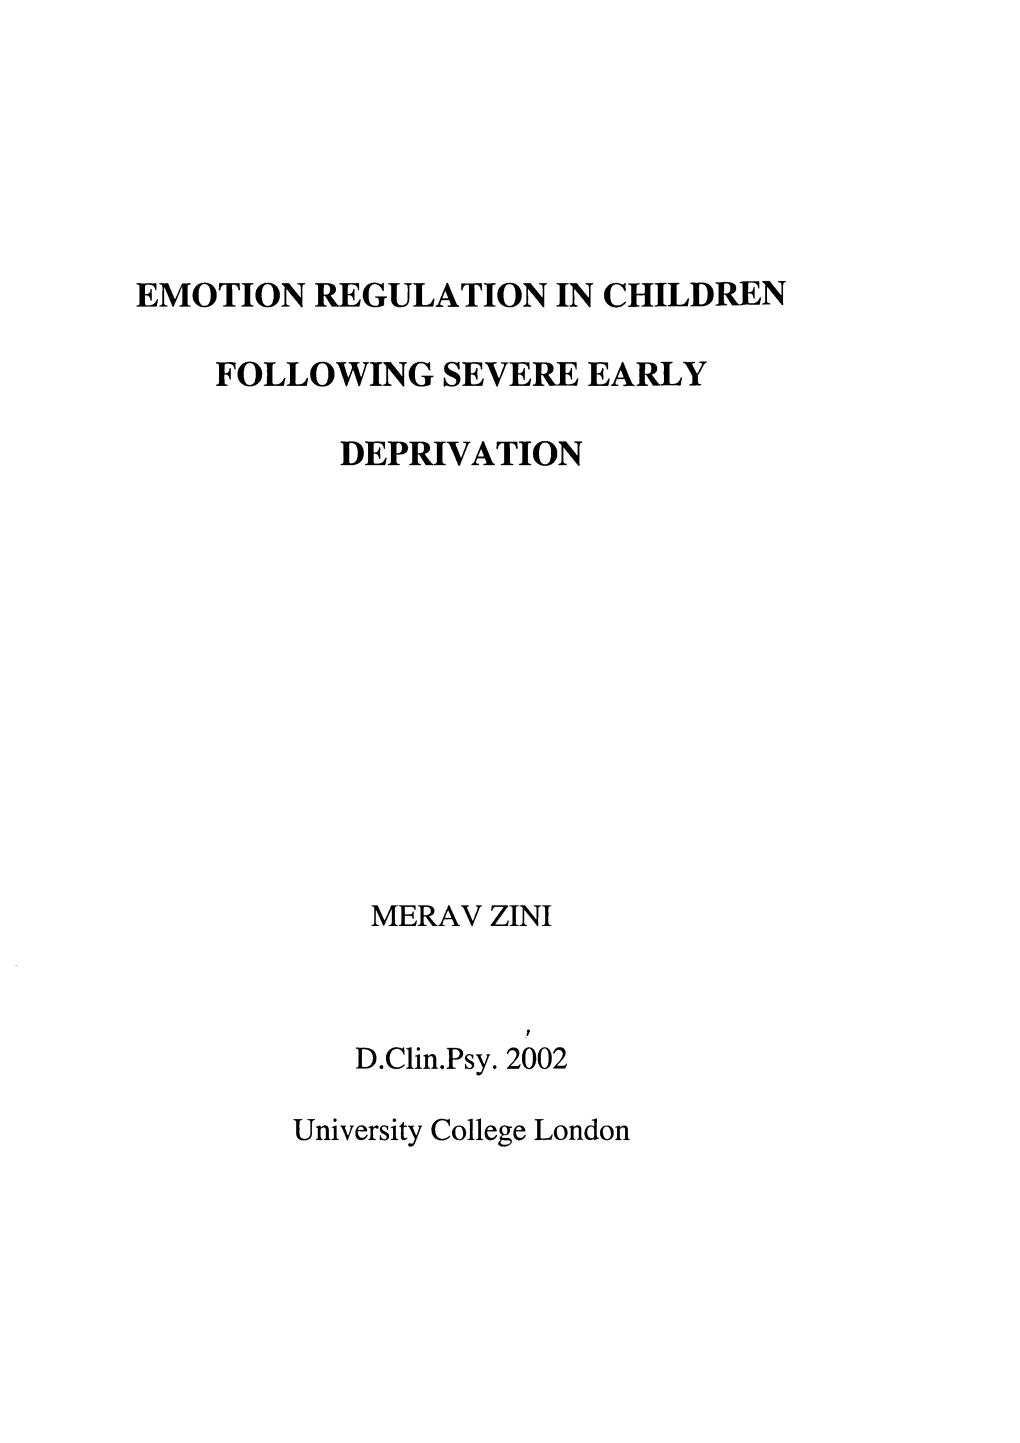 Emotion Regulation in Children Following Severe Early Deprivation